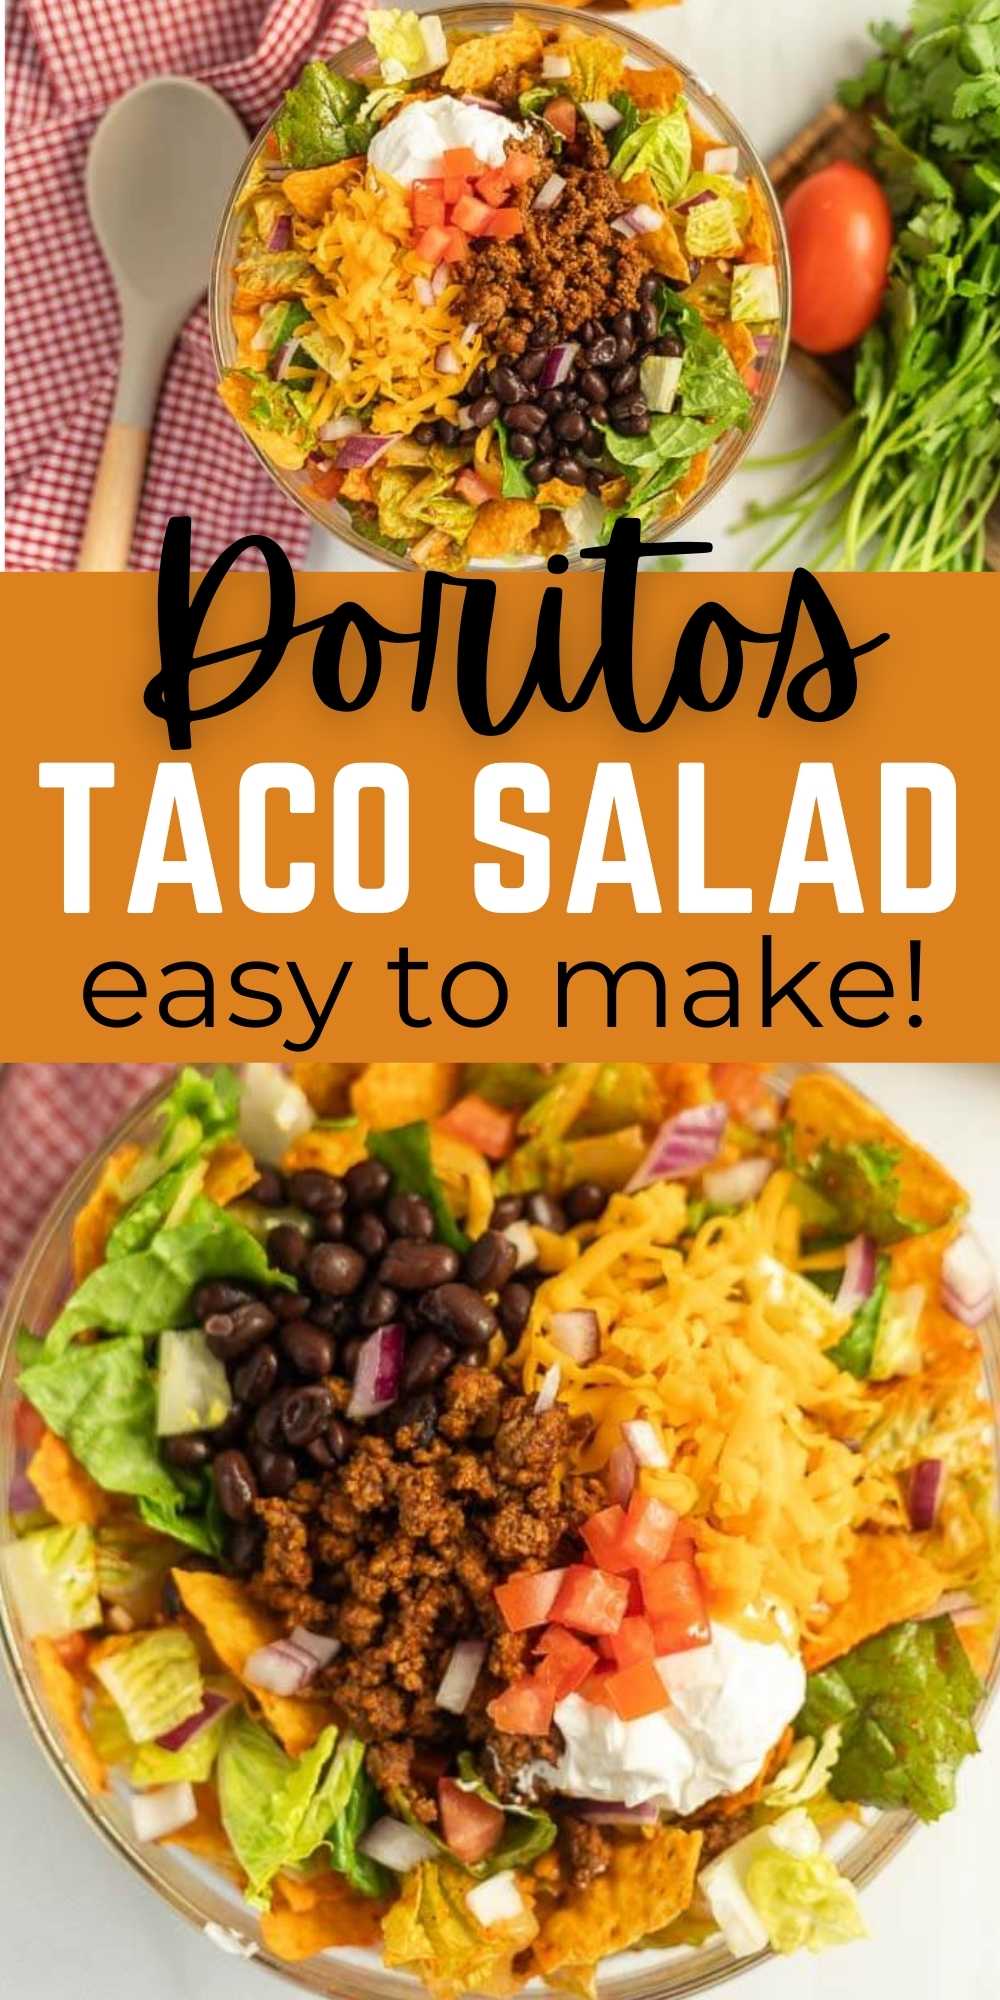 Doritos Taco Salad is a family favorite recipe. It is loaded with ground beef, taco seasoning, Doritos and tossed with Catalina Dressing. You will love this easy to make and delicious Doritos Taco Salad recipe.  #eatingonadime #beefrecipes #tacosalads #doritosrecipes #familydinners 
